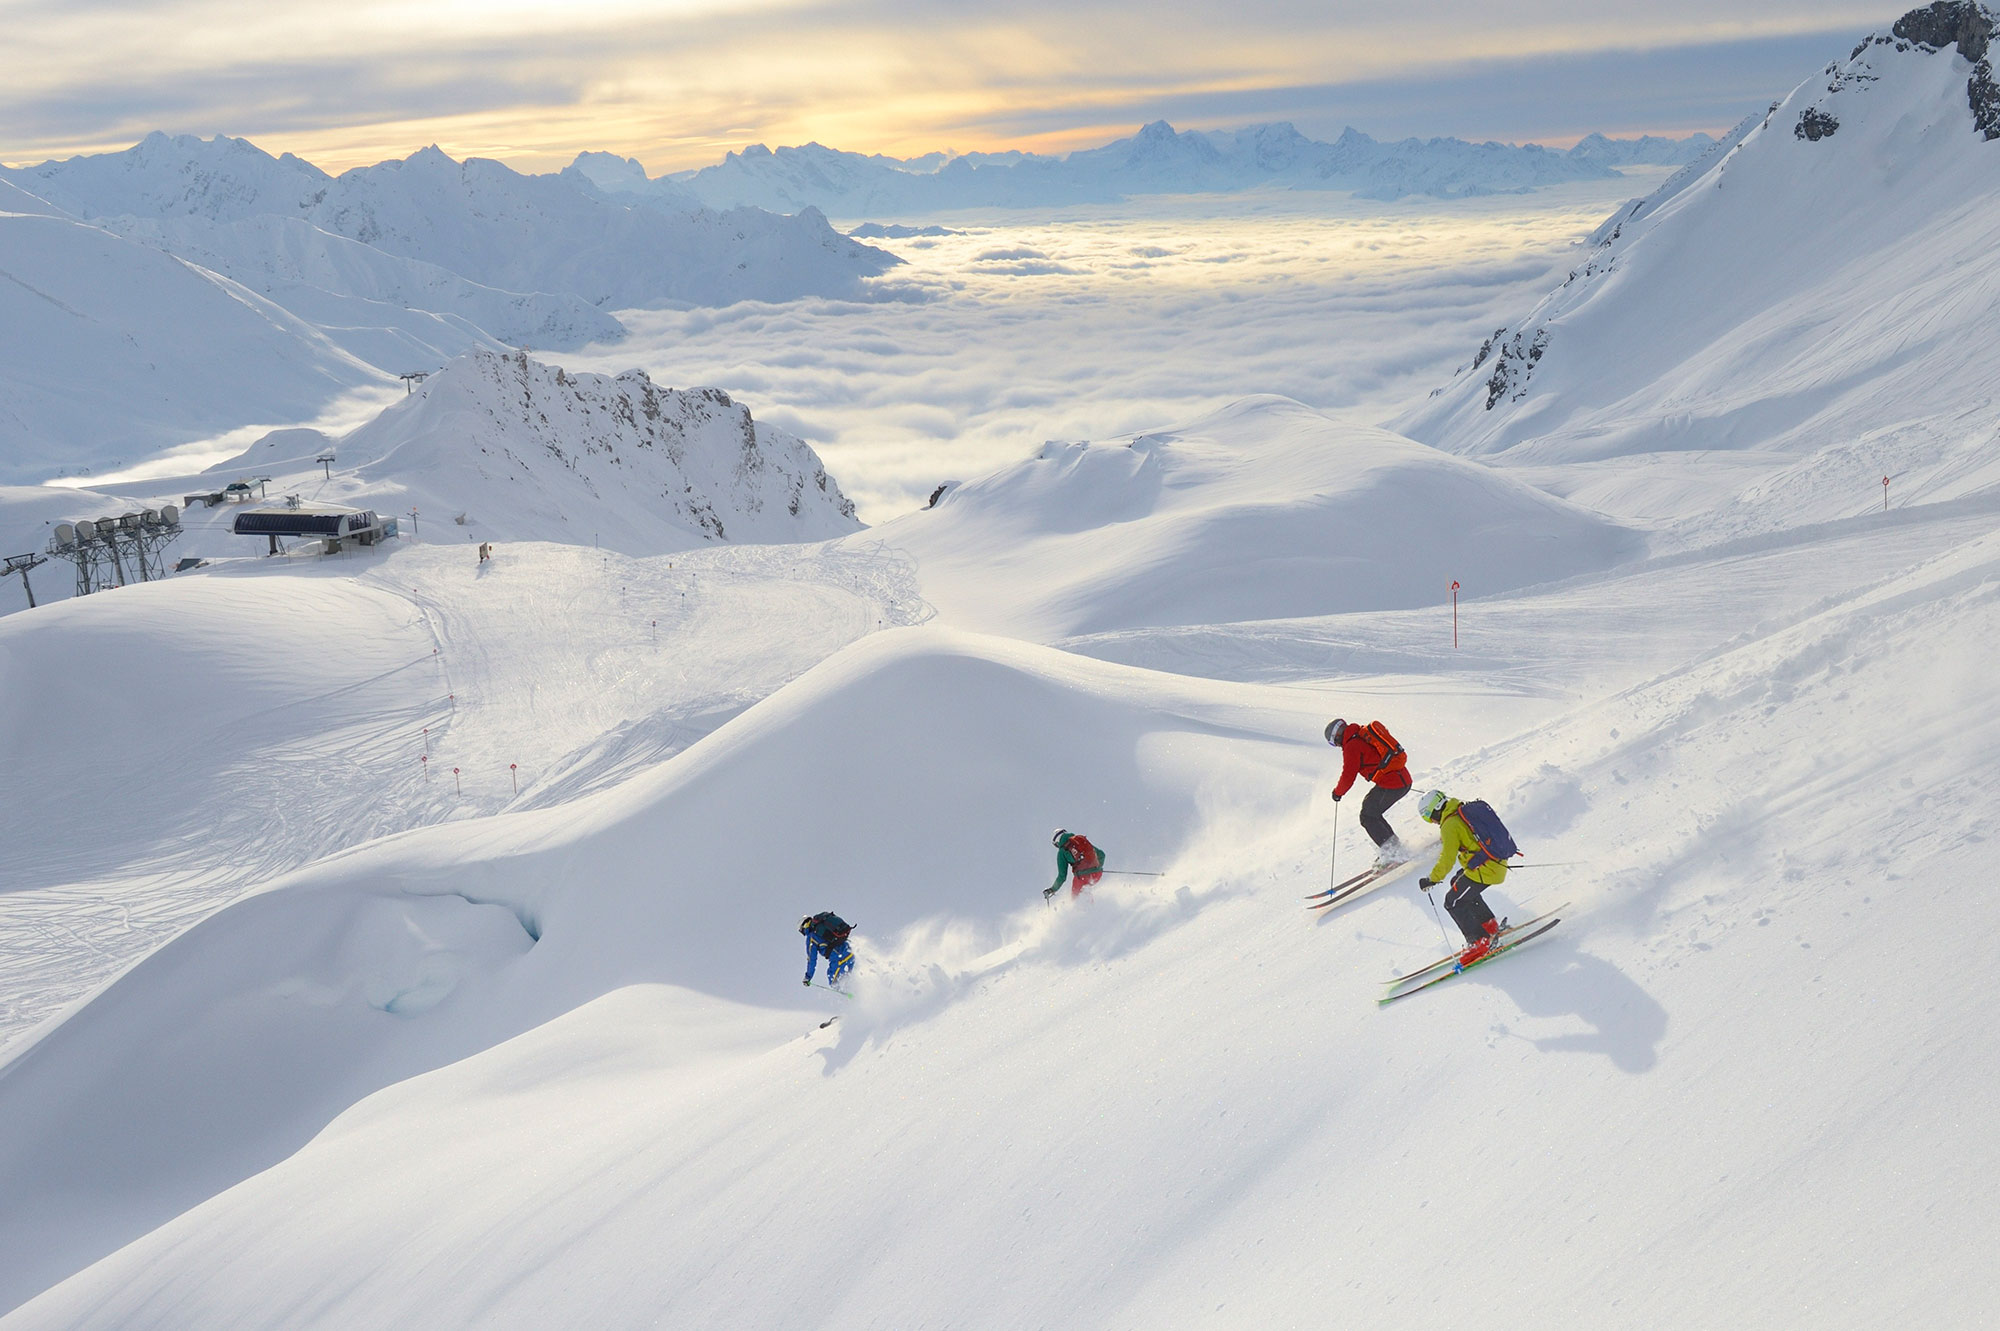 St. Anton guide for winter sports enthusiasts - Ski Arlberg